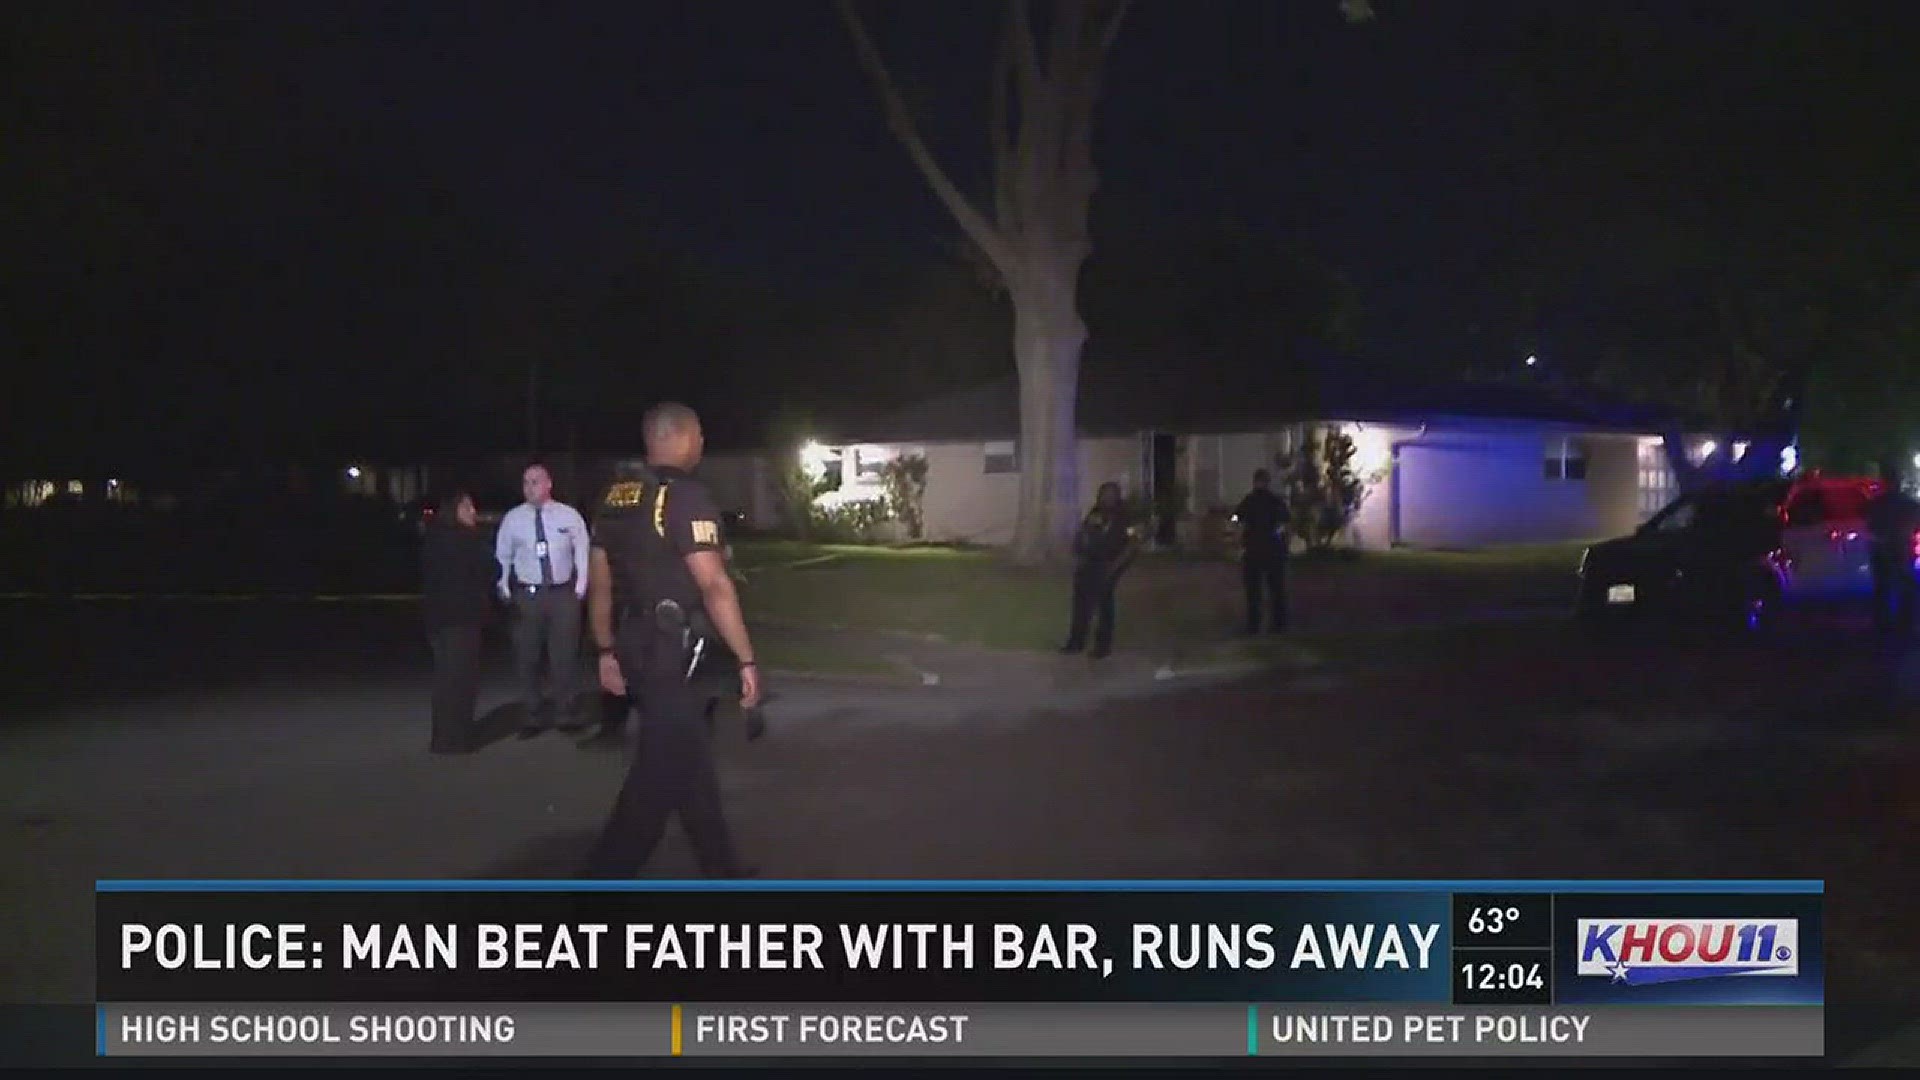 A late night argument turned deadly after police say a son beat his father to death with a baseball bat.